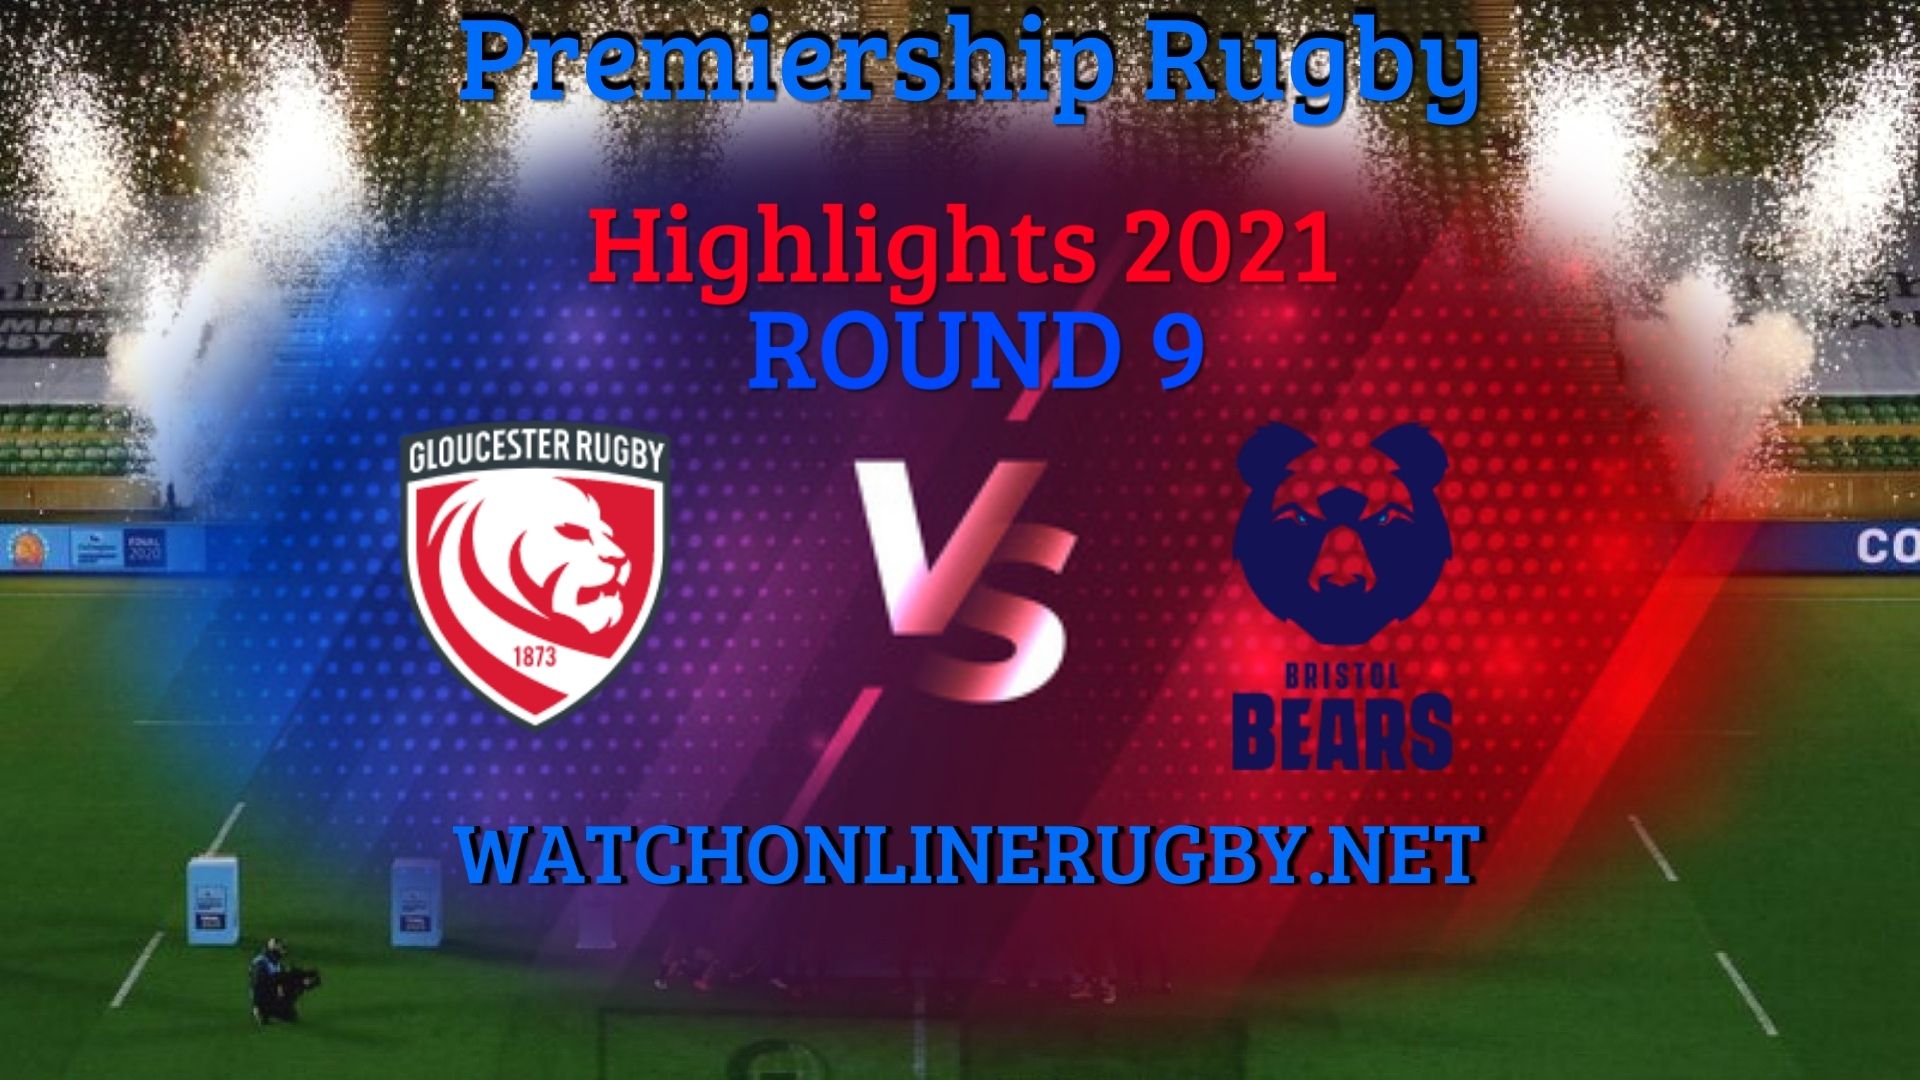 Gloucester Rugby Vs Bristol Bears Premiership Rugby 2021 RD 9